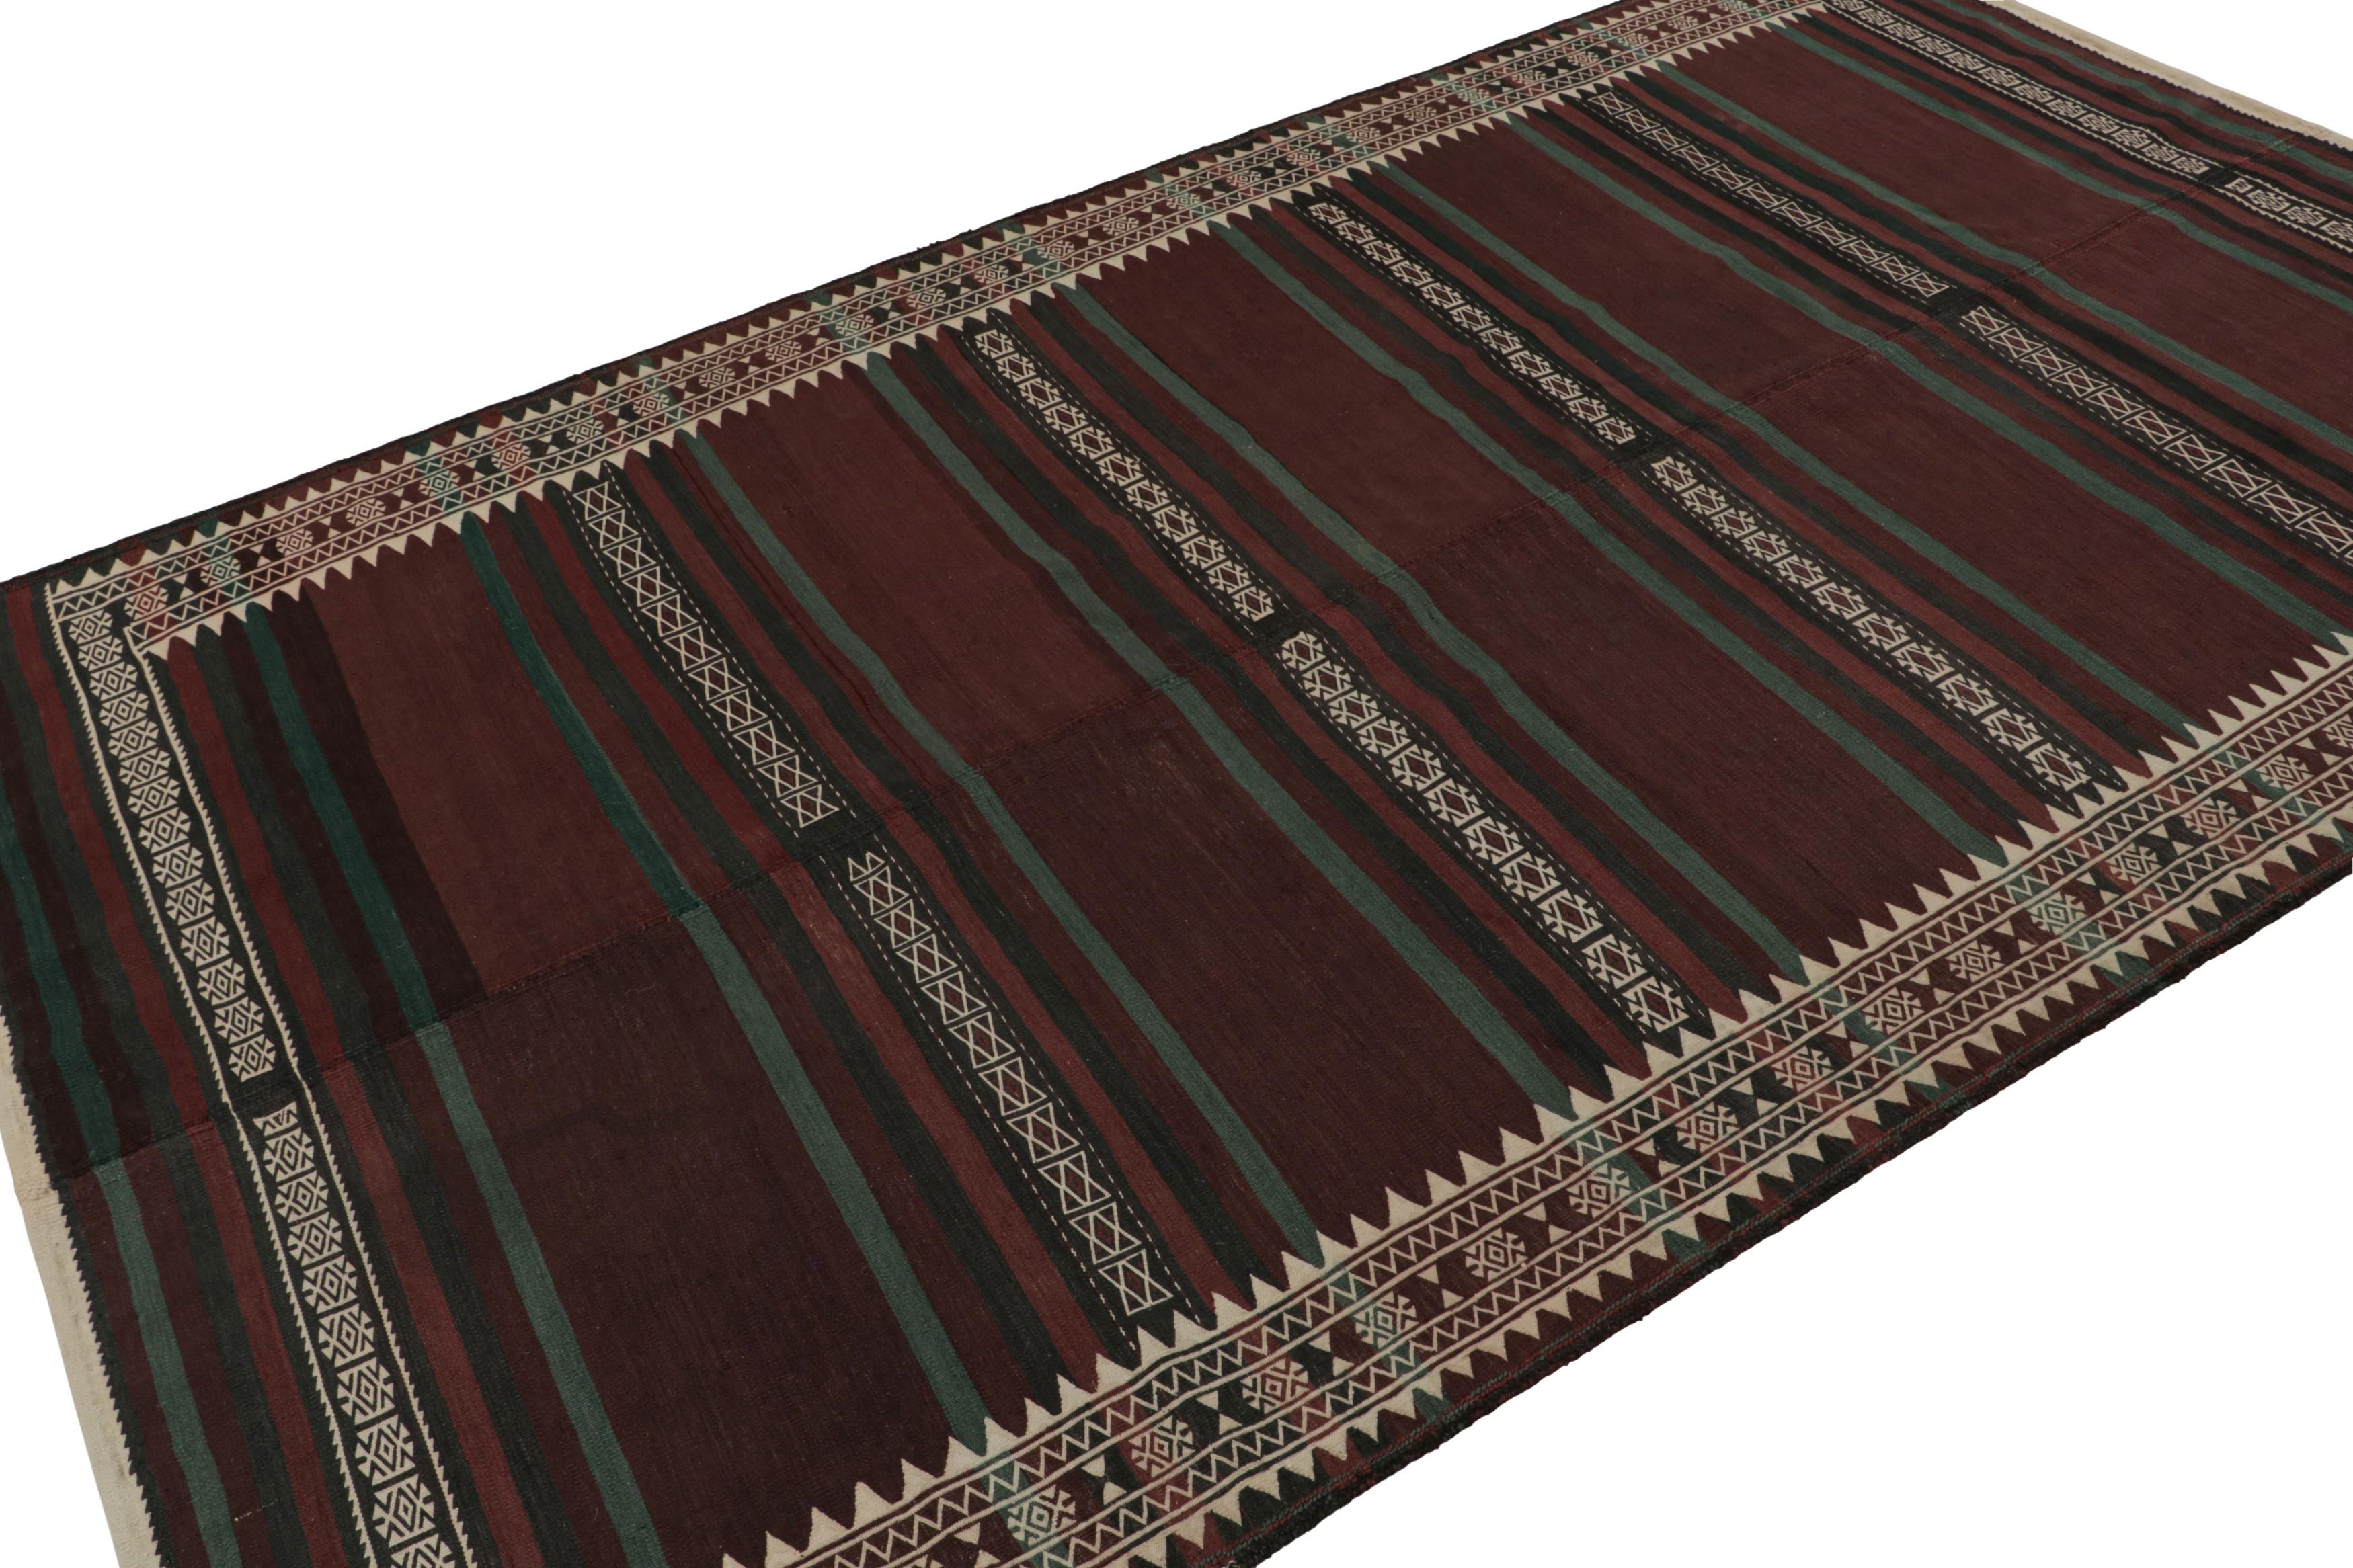 Handwoven in wool circa 1950-1960, this 6x9 vintage Afghan kilim is a new curation from Rug & Kilim’s collection. 

On the Design:

This particular rare piece enjoys brown, black & green stripes with fine white detailing. The constitution embraces a